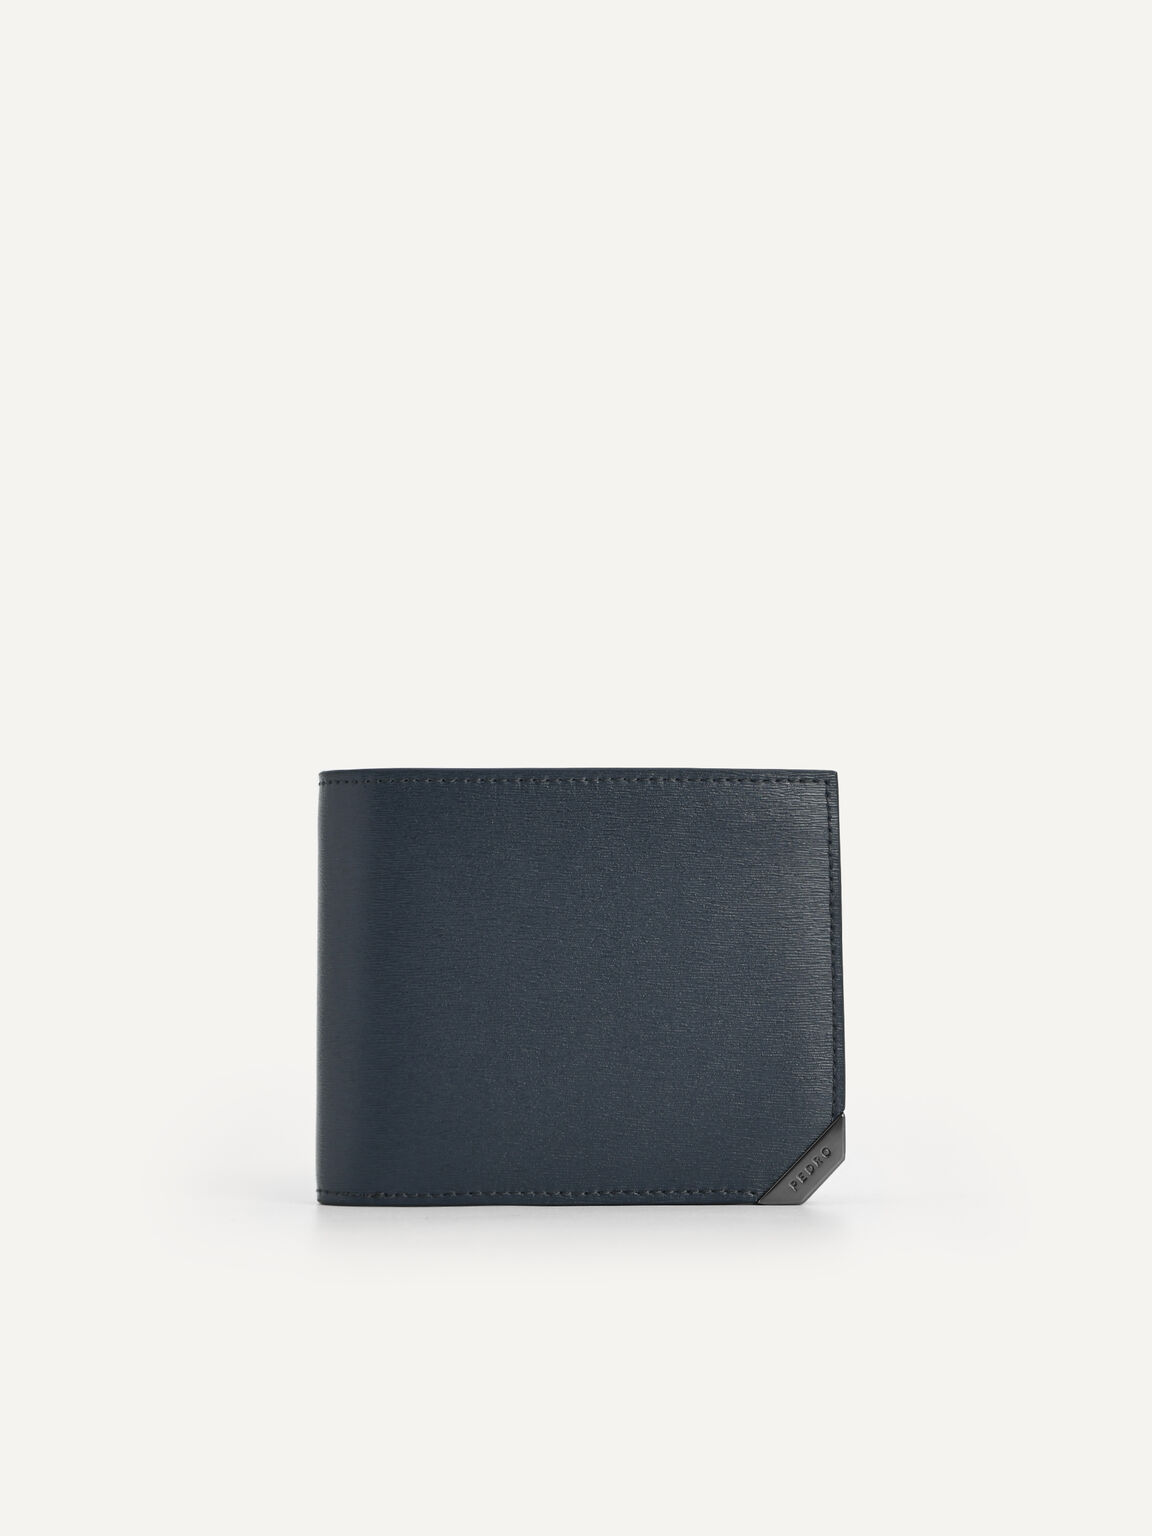 Textured Leather Bi-Fold Wallet with Flip, Navy